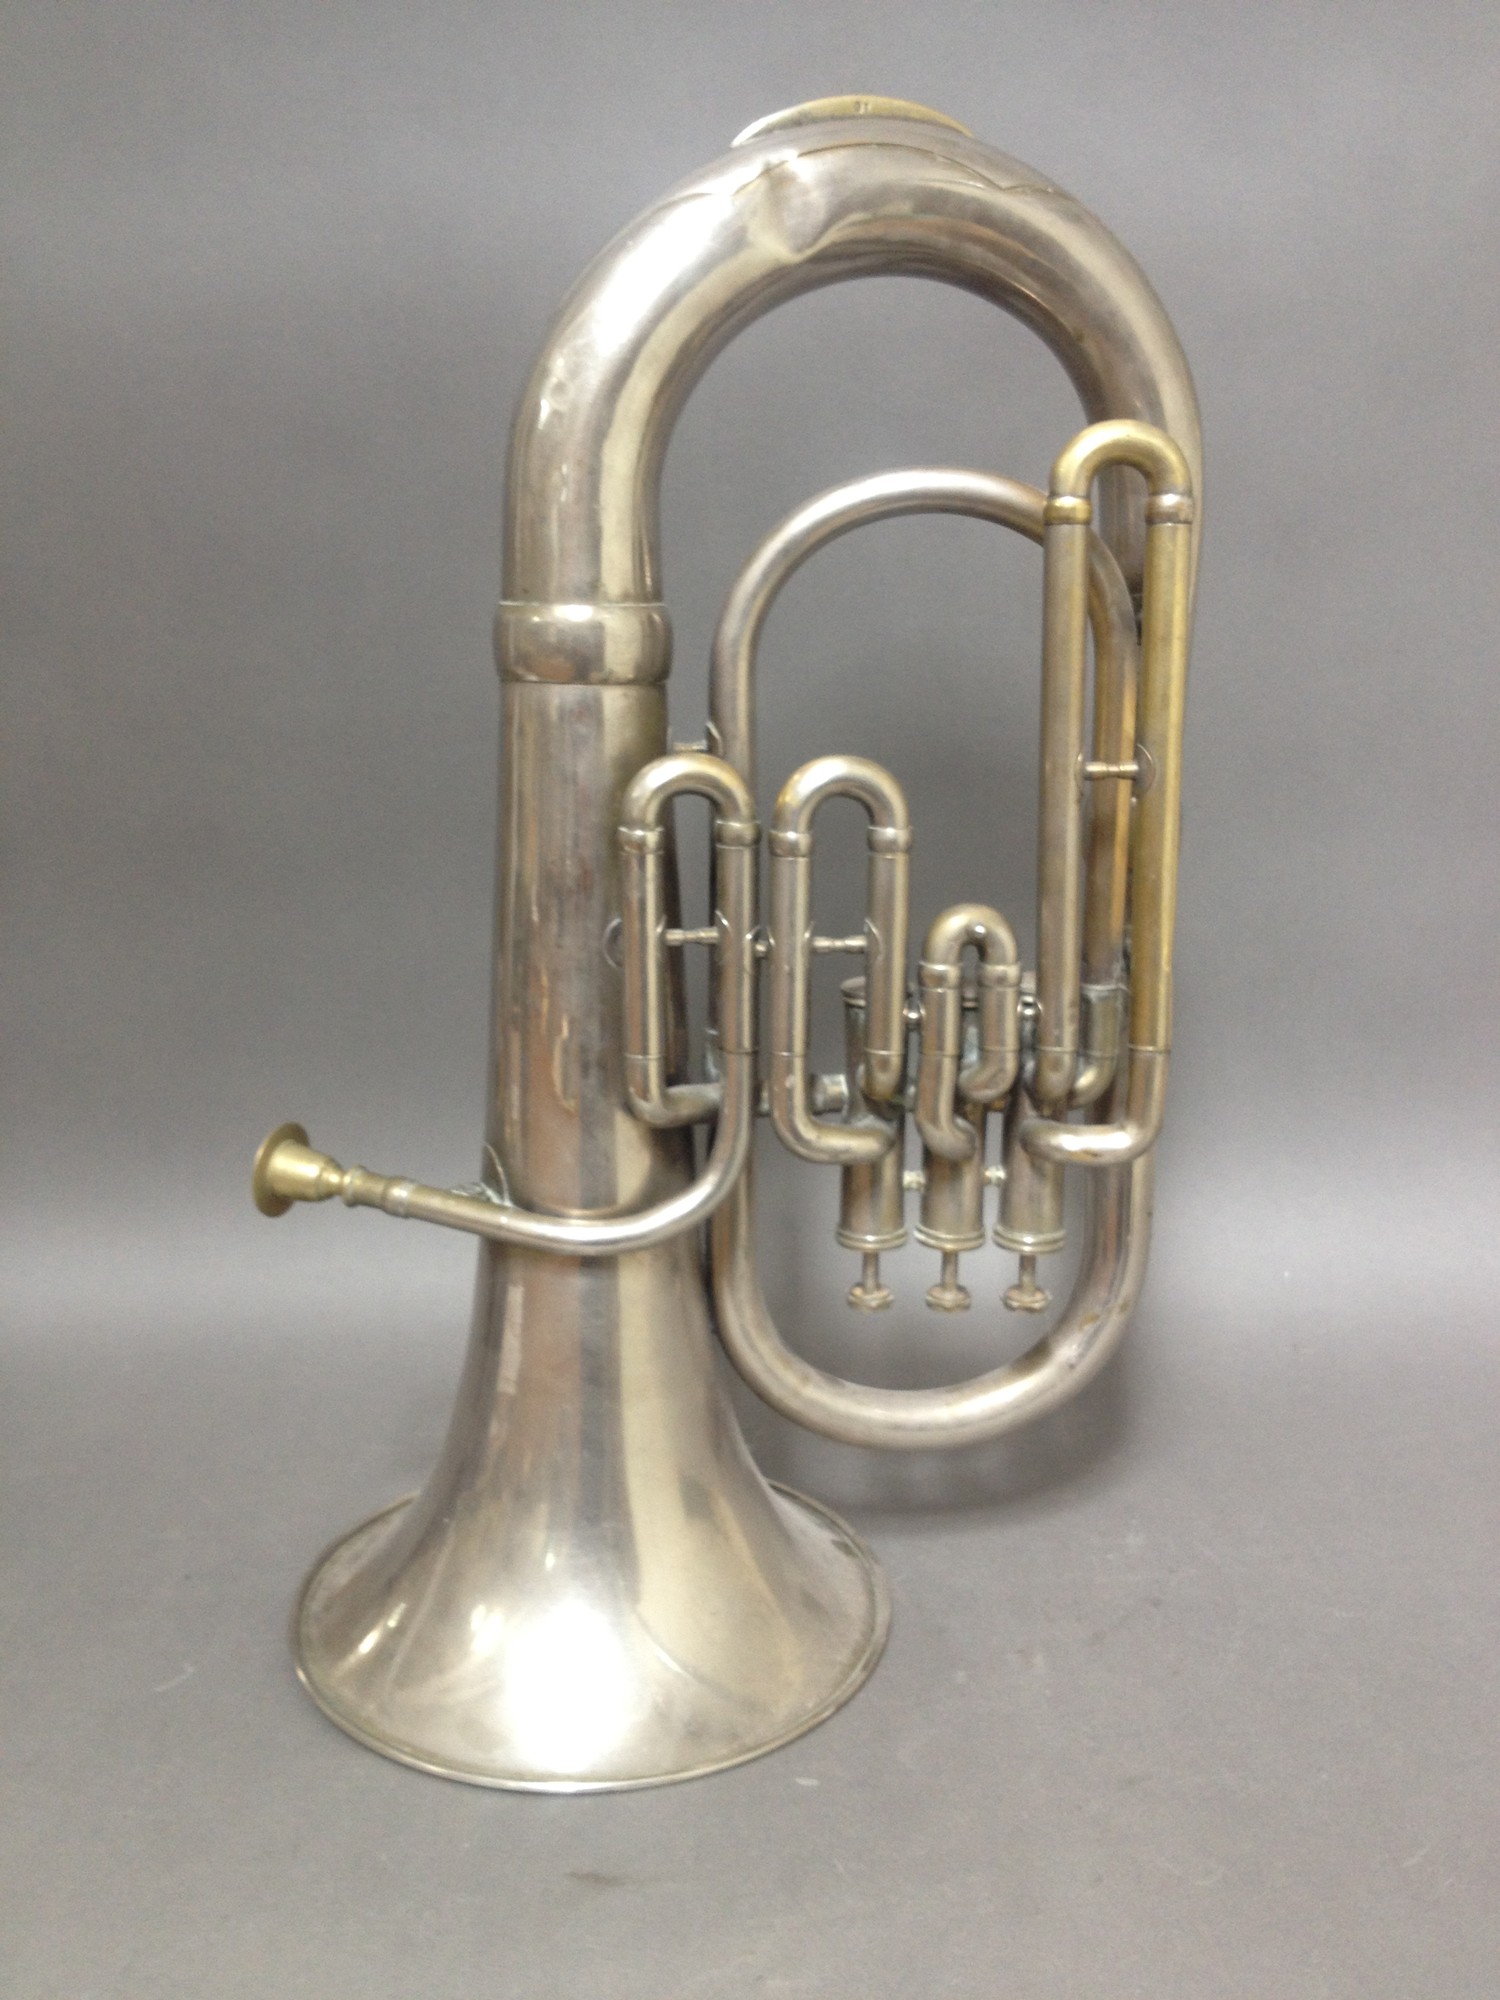 A silver plated euphonium.